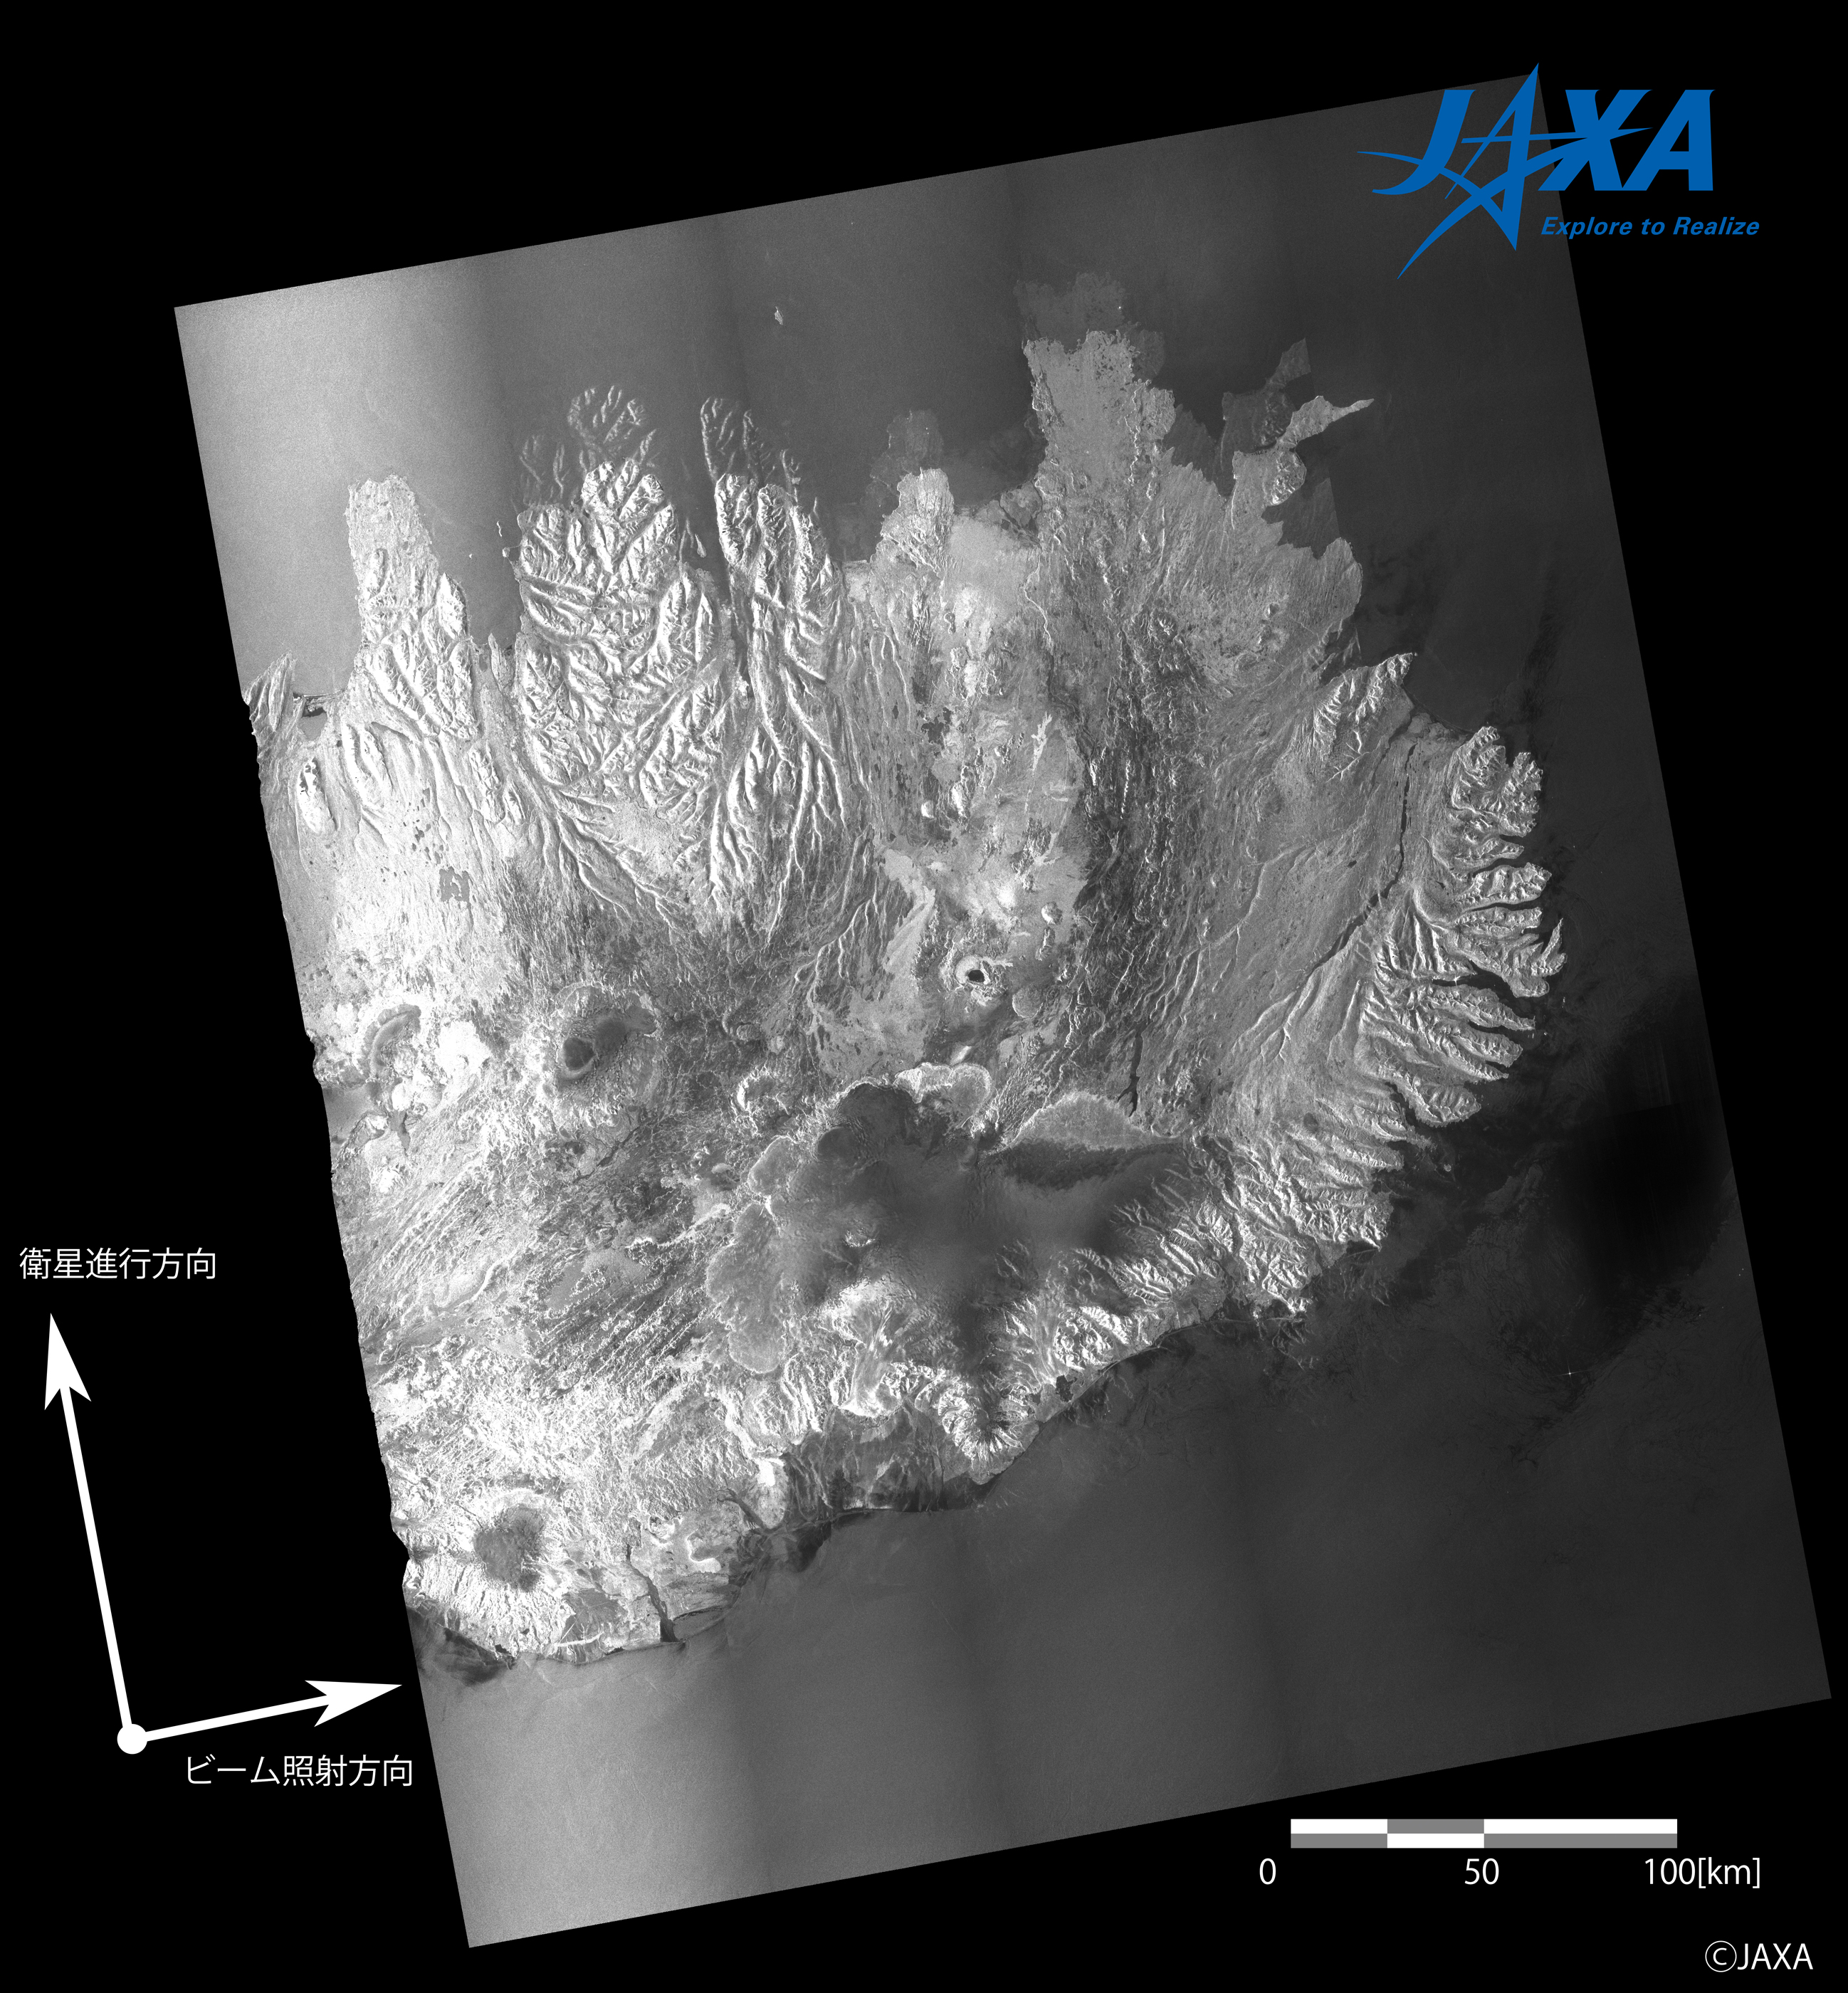 Fig. 2: An eastern part of Ice land observed by ScanSAR mode on August 9, 2014.